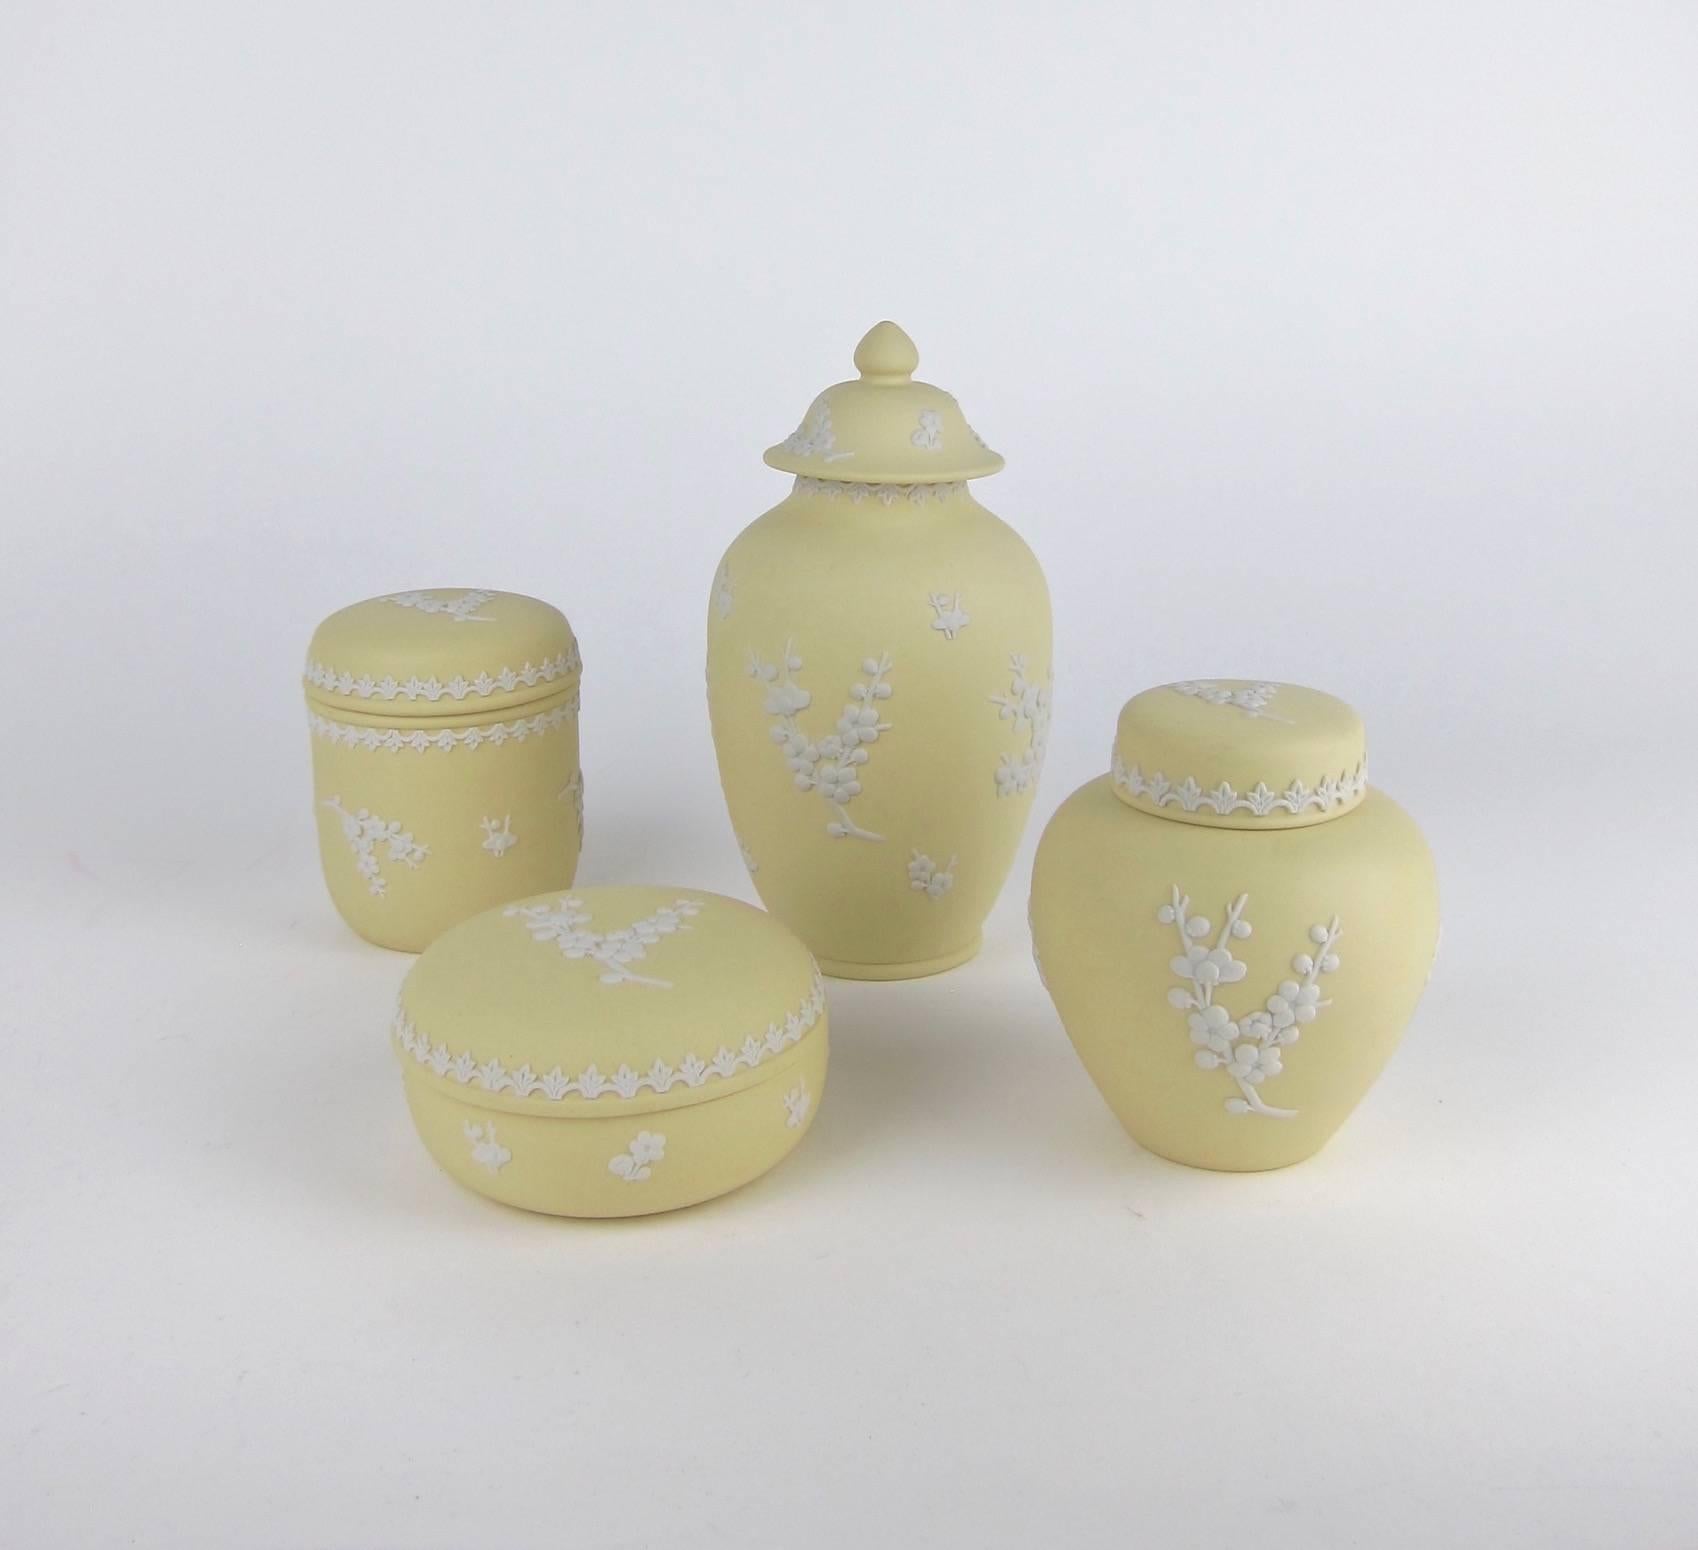 A vintage set of four English Wedgwood jasper ware covered vessels. The collection consists of a a temple jar, a ginger jar, a round box and a cylindrical box in solid Primrose Yellow Jasper, a color Wedgwood used between 1976 and 1982 for a small